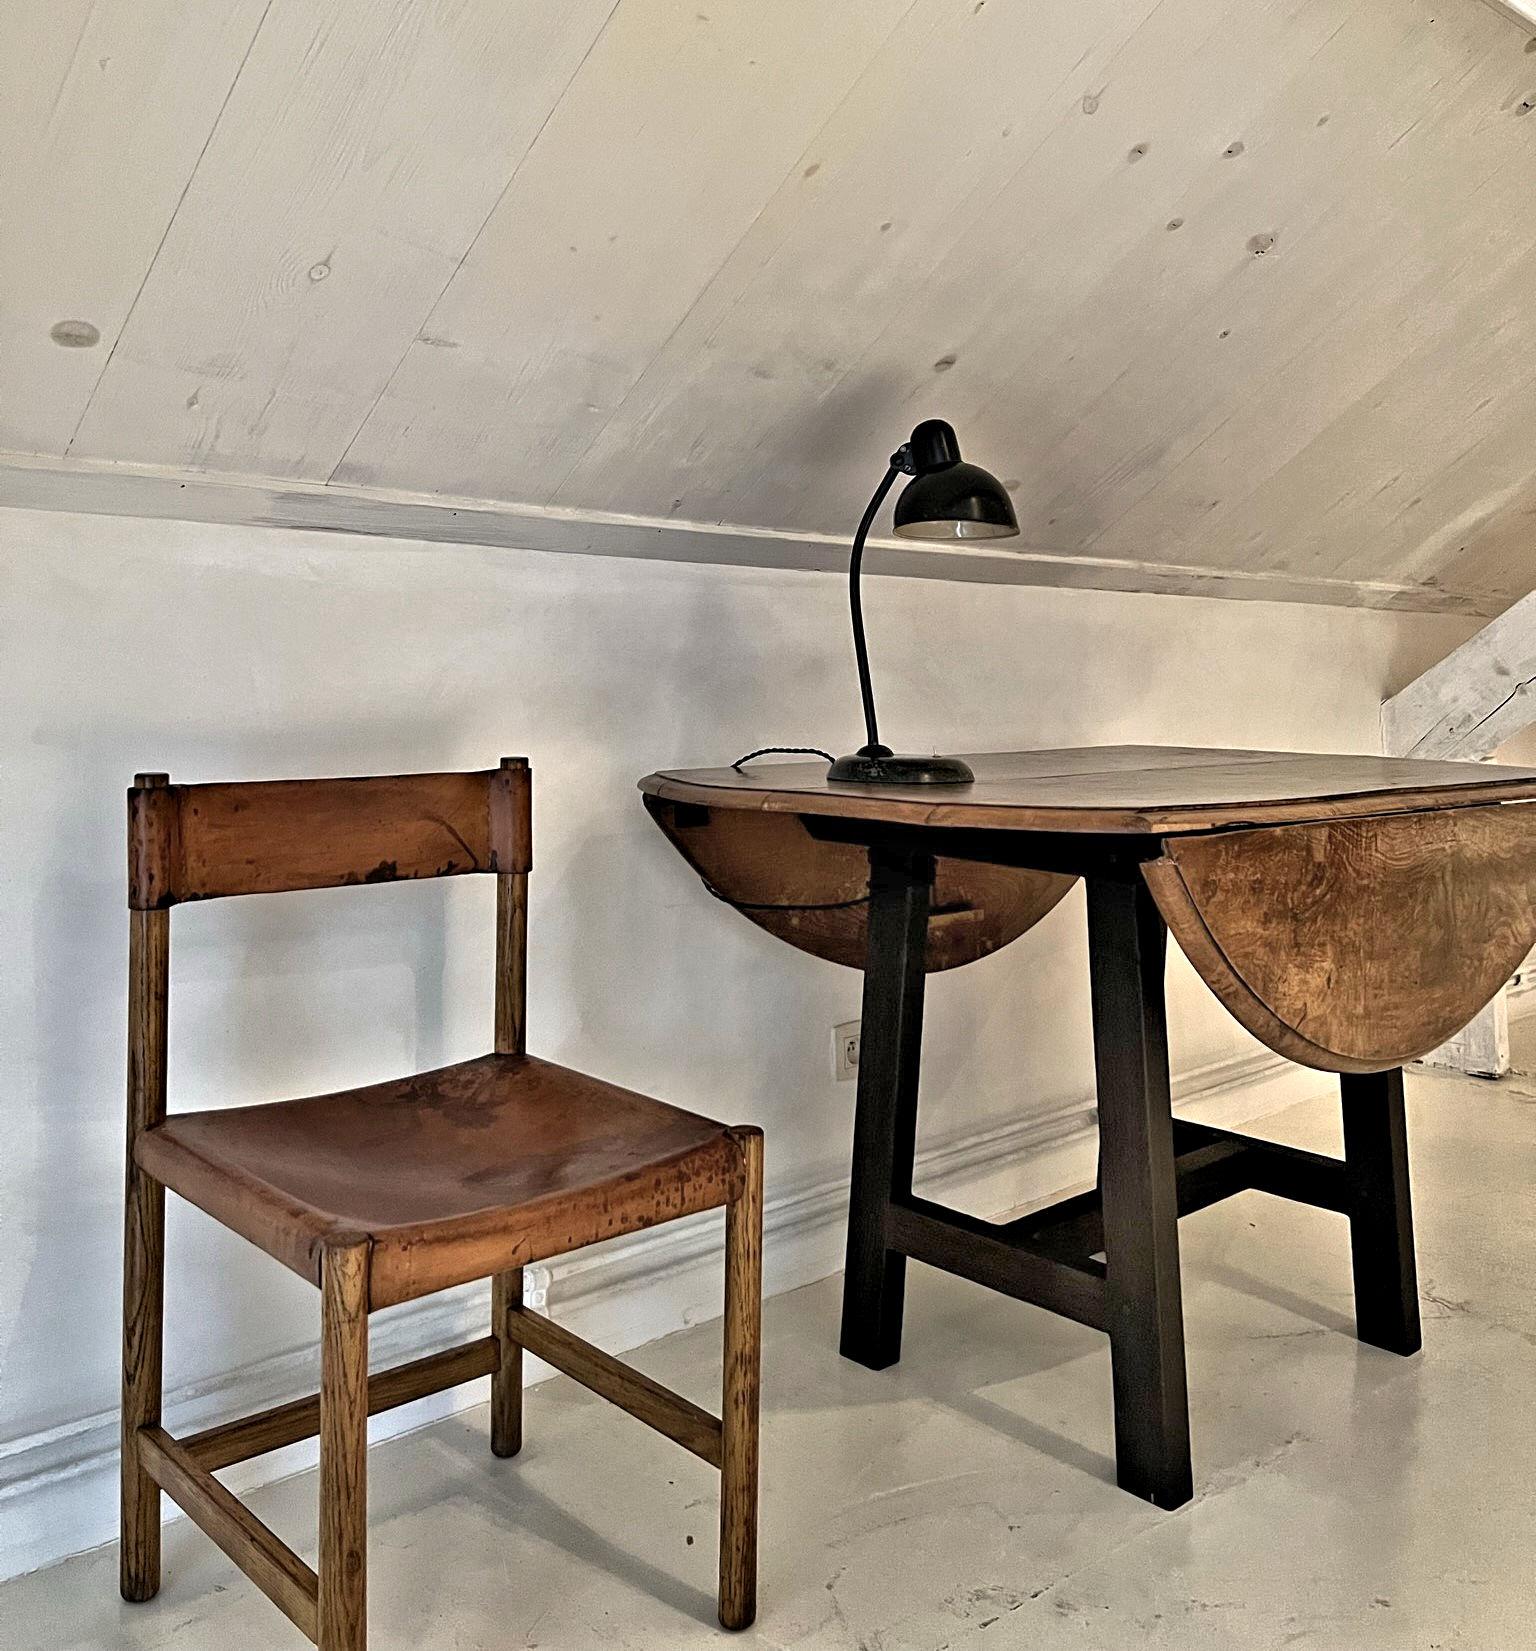 Hand-Crafted Jordi Villanova Leather and Wood Chair For Sale